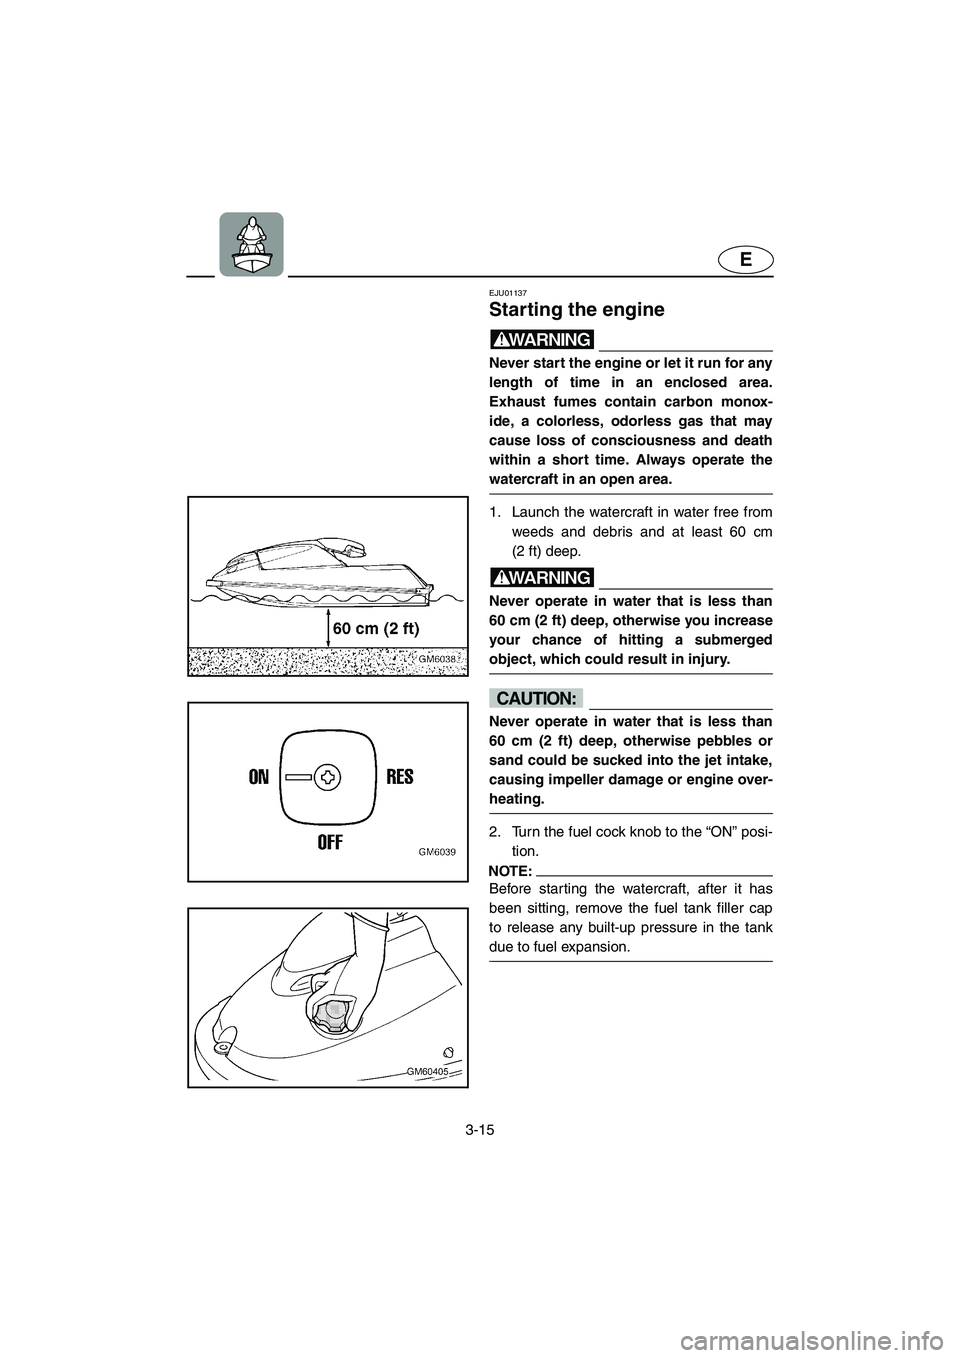 YAMAHA SUPERJET 2002  Owners Manual 3-15
E
EJU01137 
Starting the engine  
WARNING@ Never start the engine or let it run for any
length of time in an enclosed area.
Exhaust fumes contain carbon monox-
ide, a colorless, odorless gas that